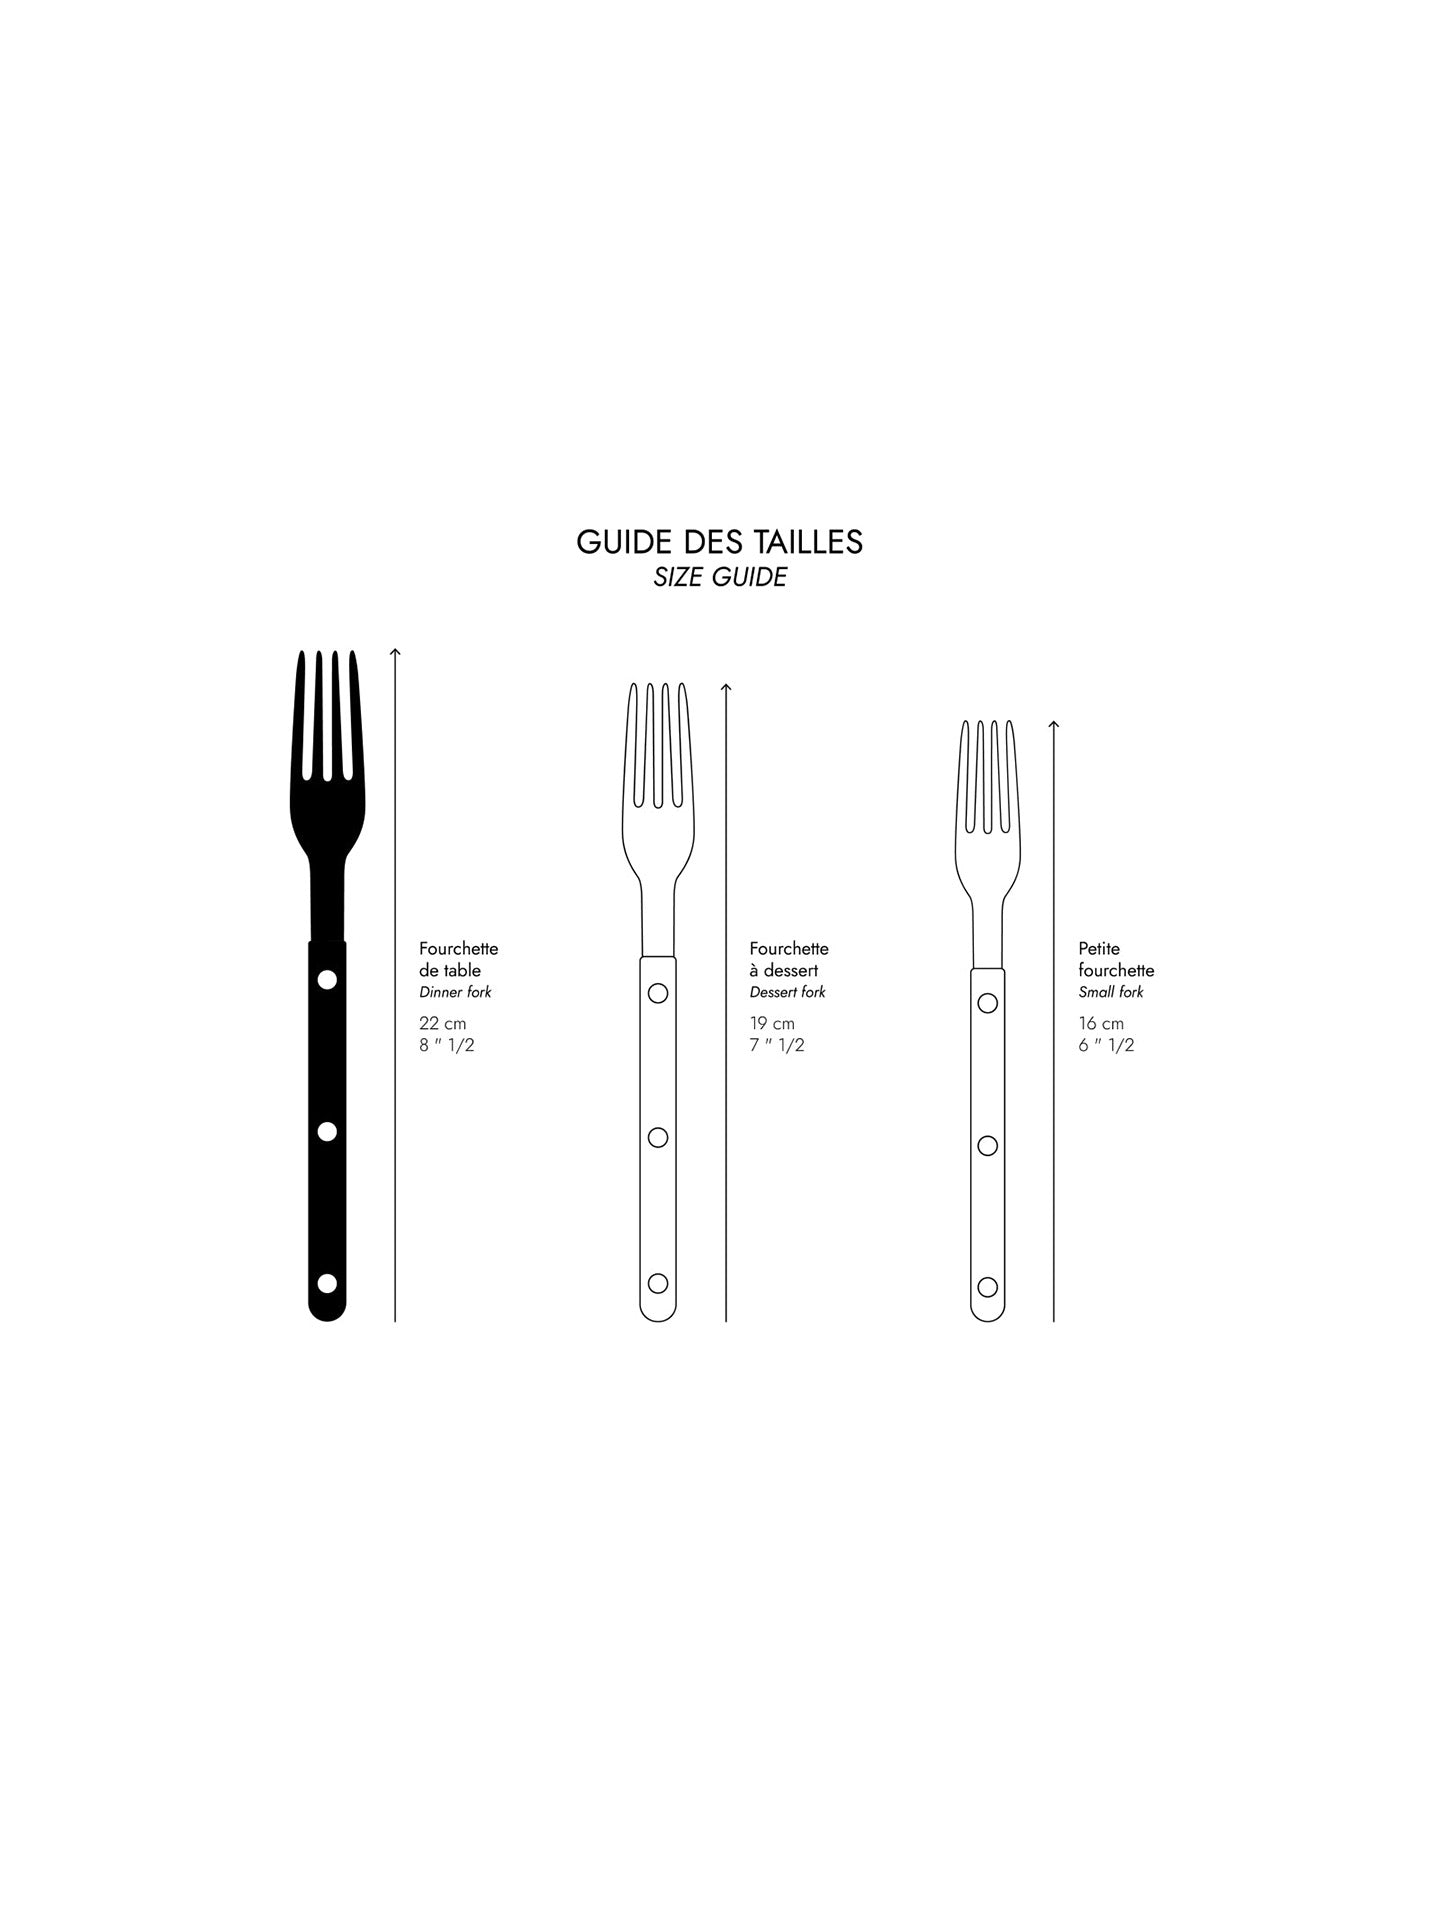 The Bistrot dinner fork is 22 cm tall.